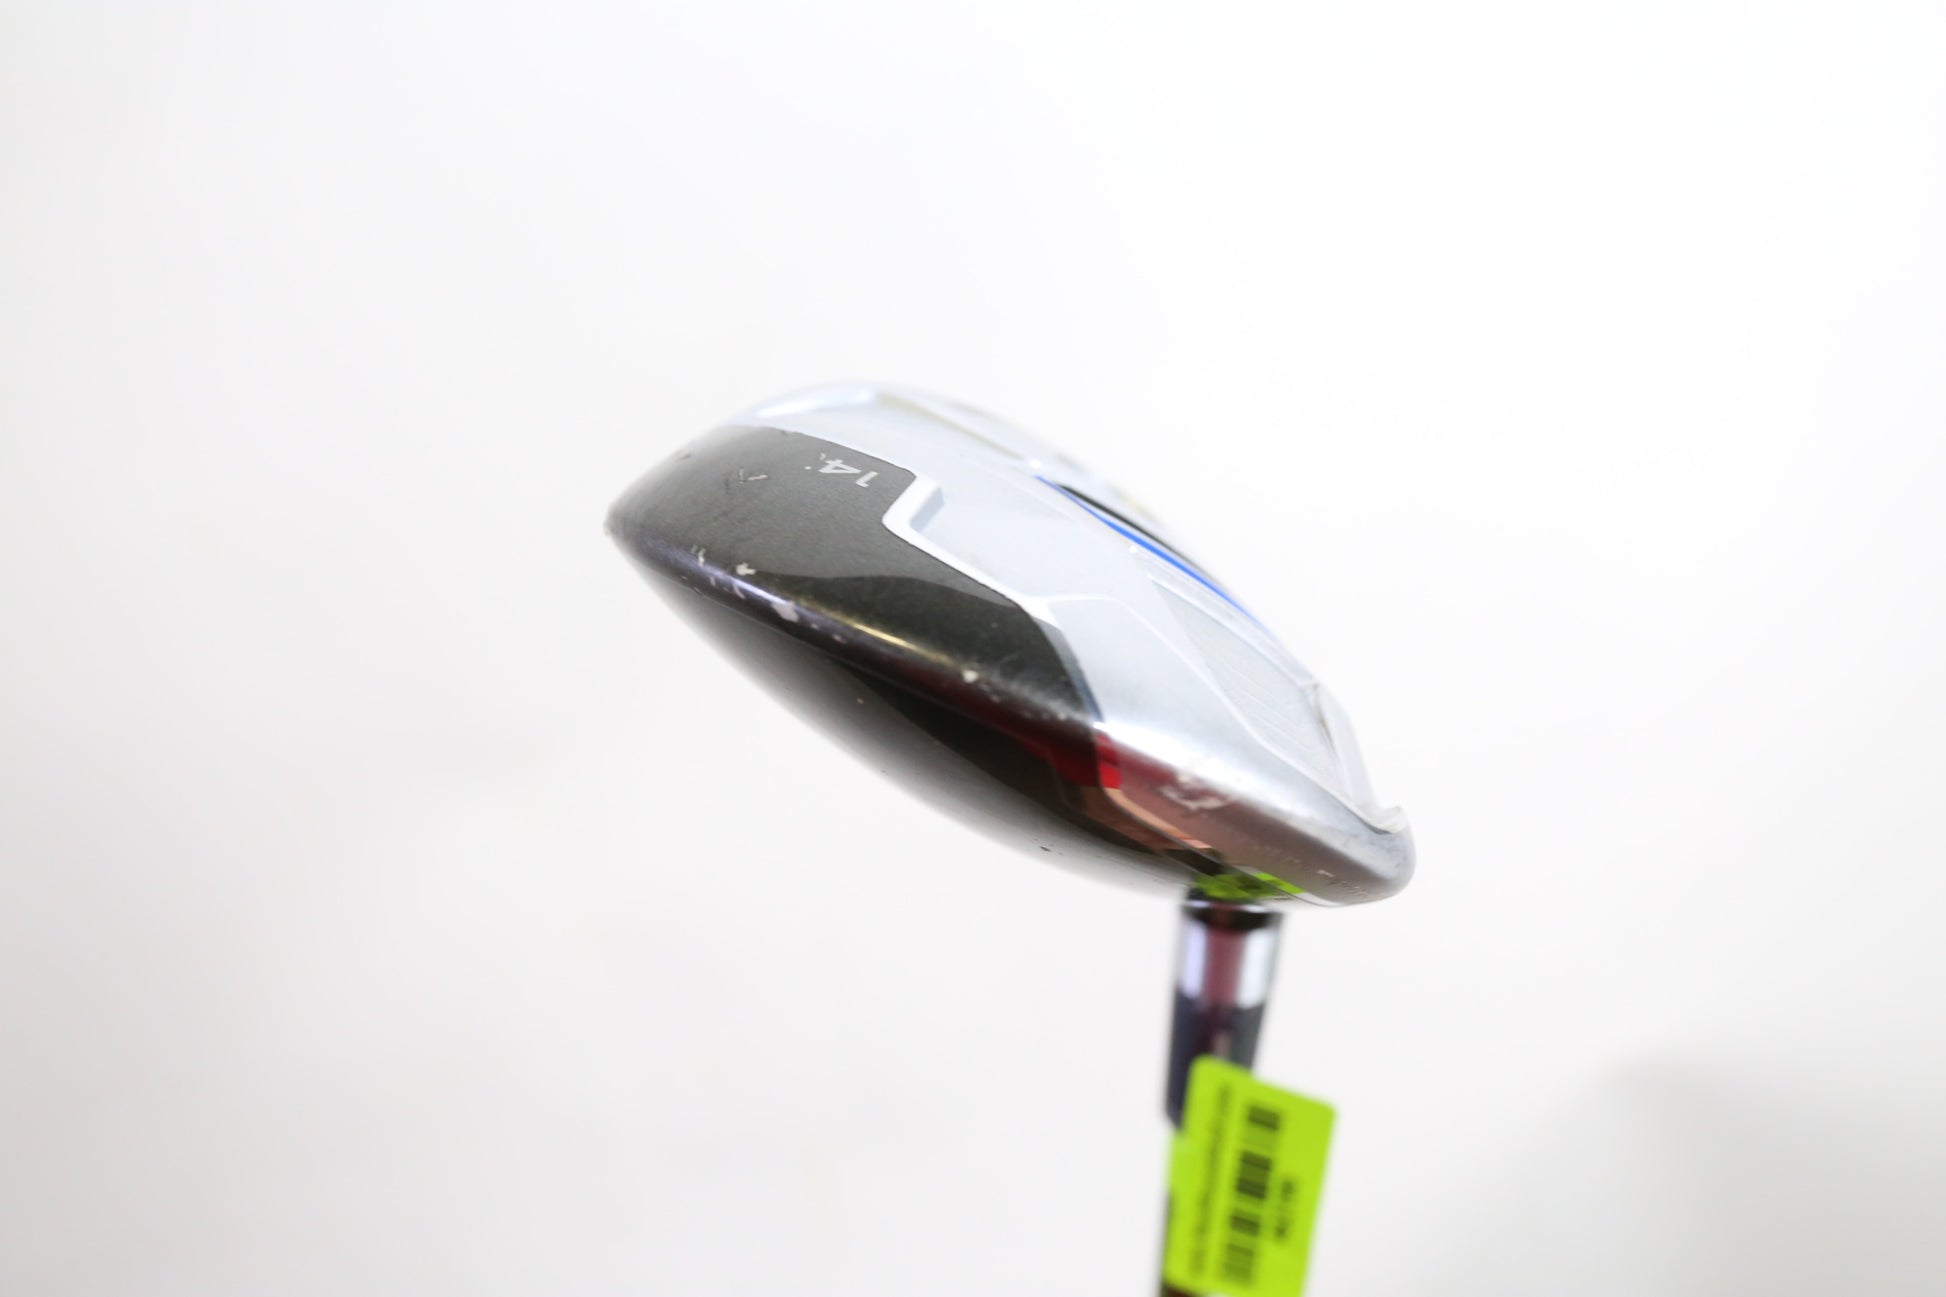 Used TaylorMade SLDR 3-Wood - Right-Handed - 14 Degrees - Extra Stiff Flex-Next Round